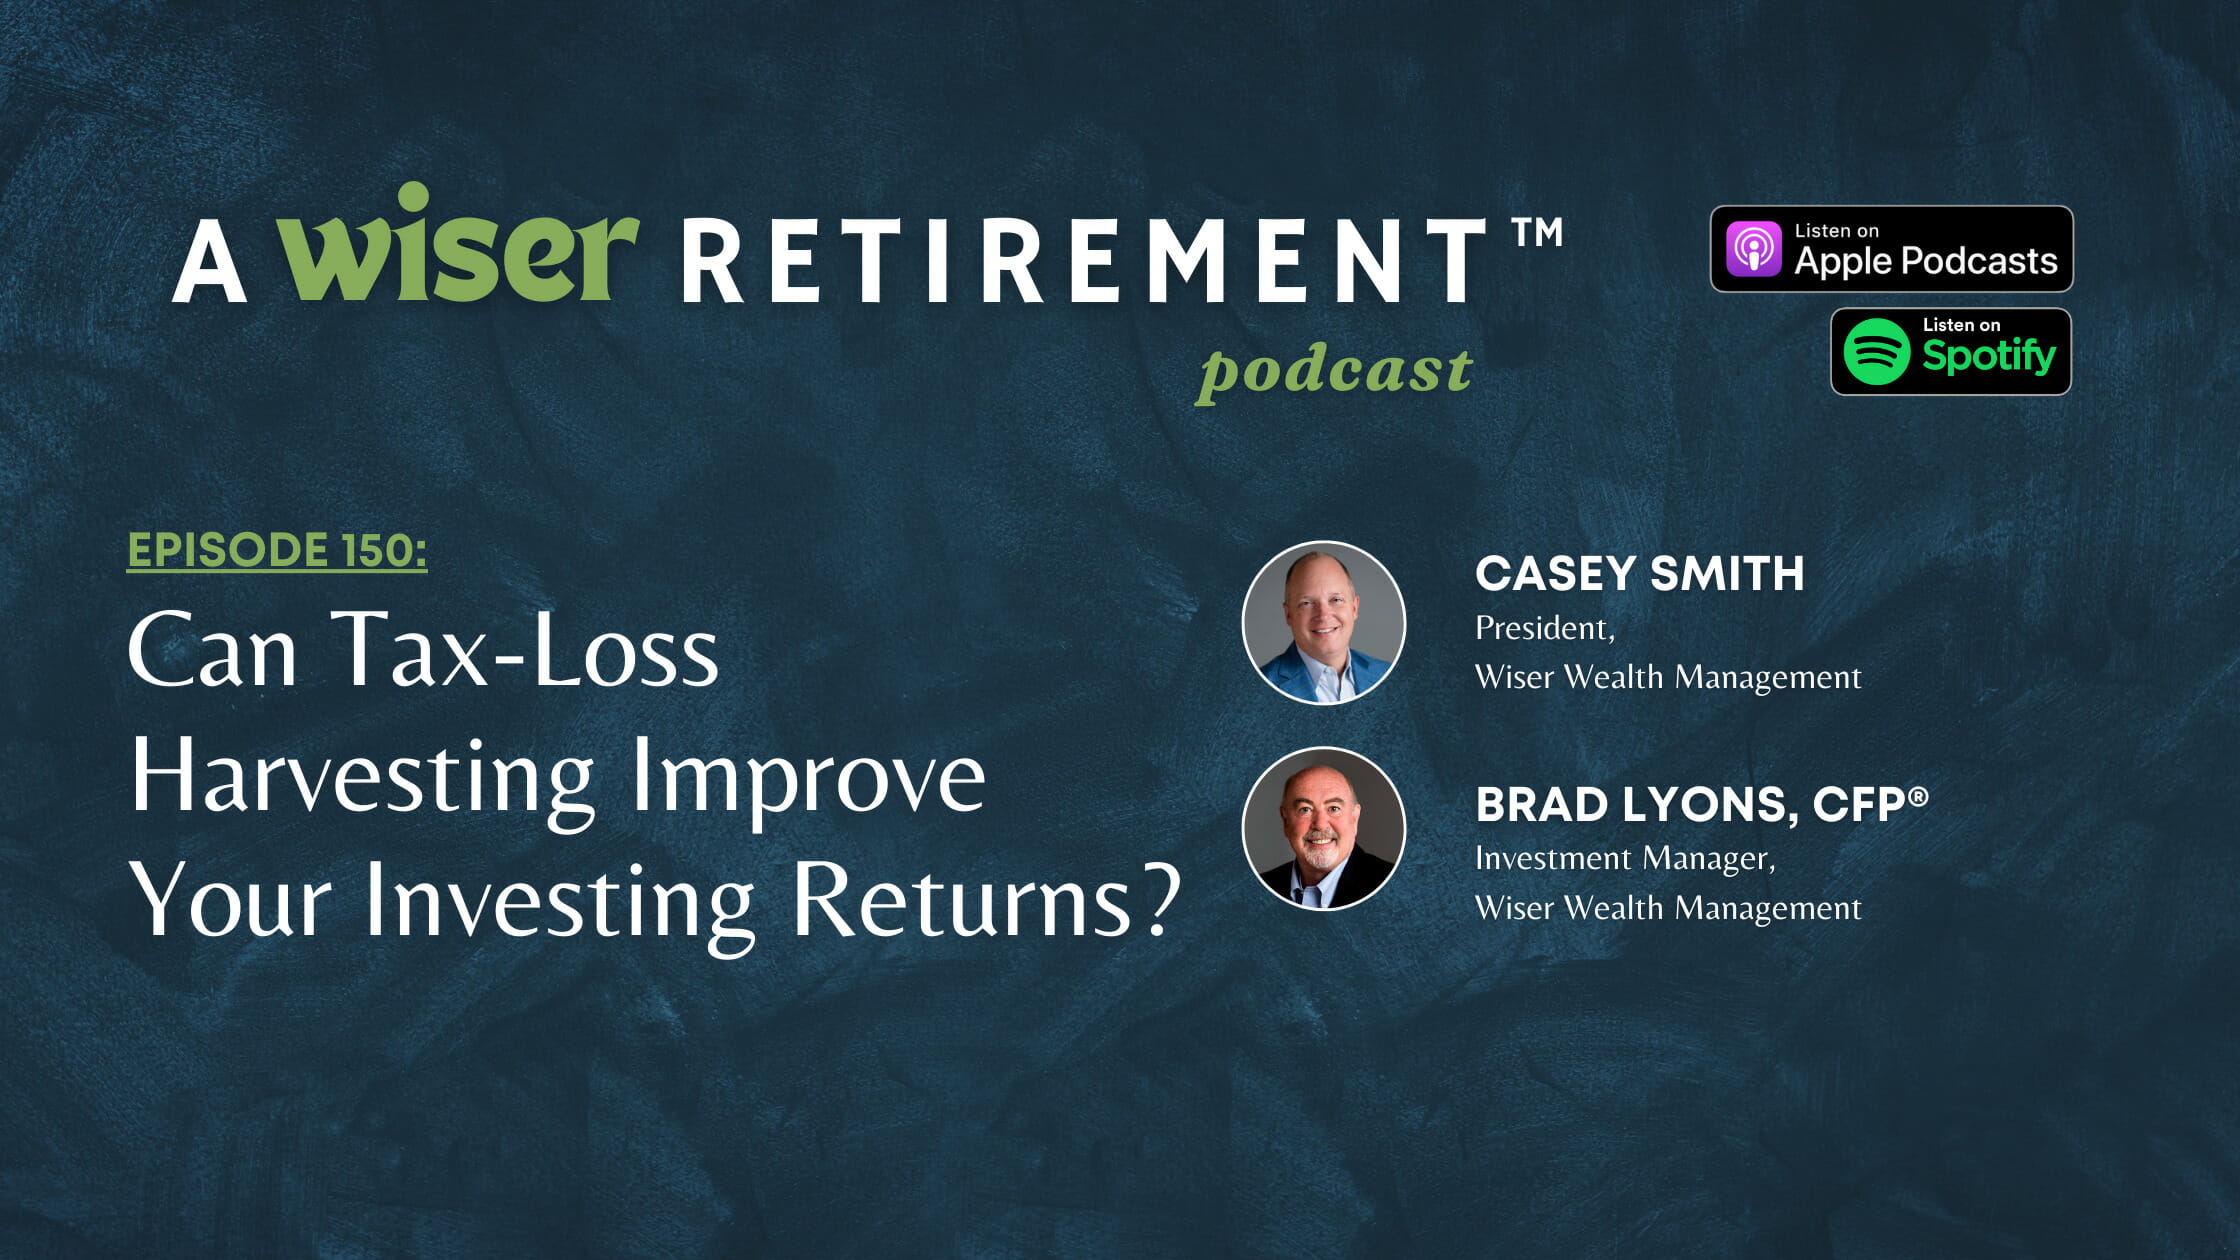 Can Tax-Loss Harvesting Improve Your Investing Returns?